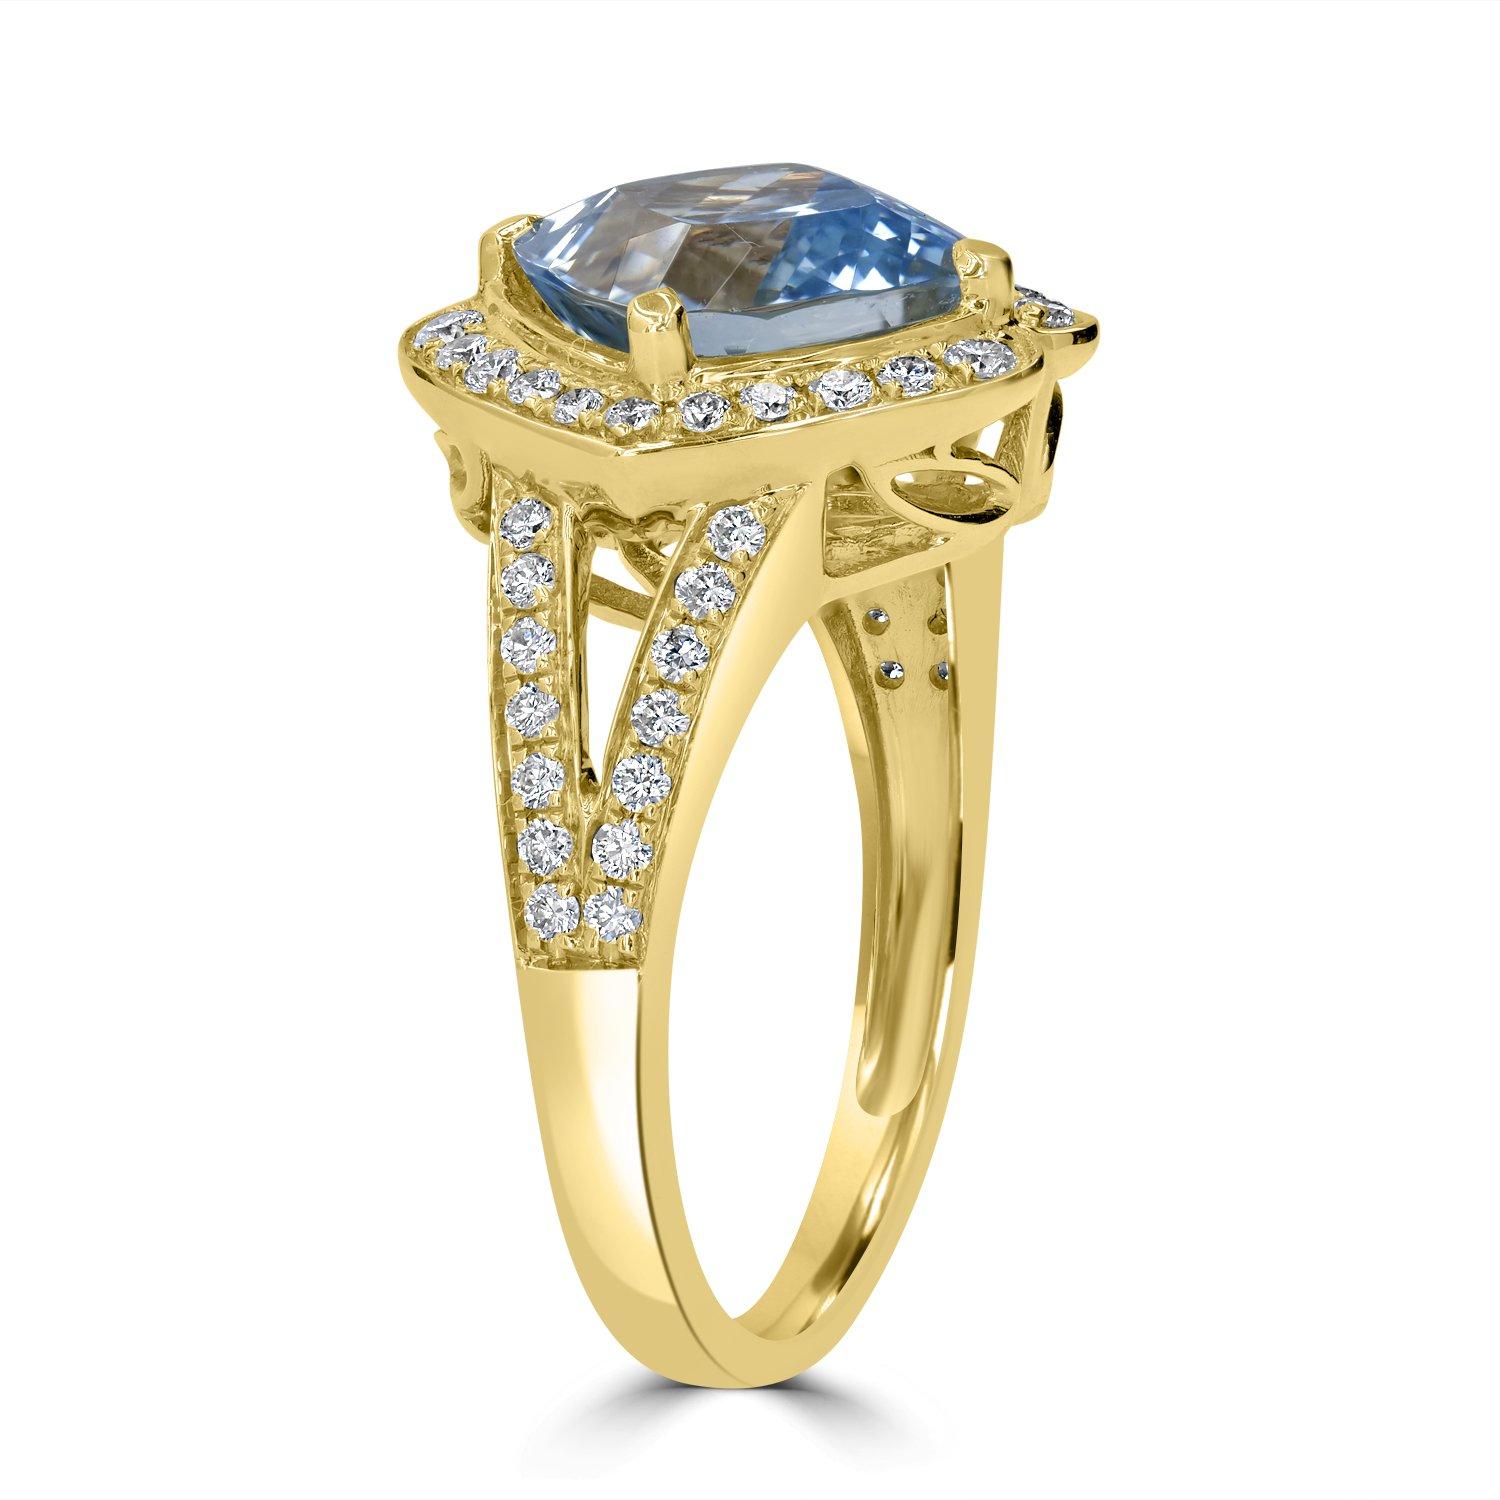 Women's 3.12ct Aquamarine Ring with 0.42Tct Diamonds Set in 14K Yellow Gold For Sale